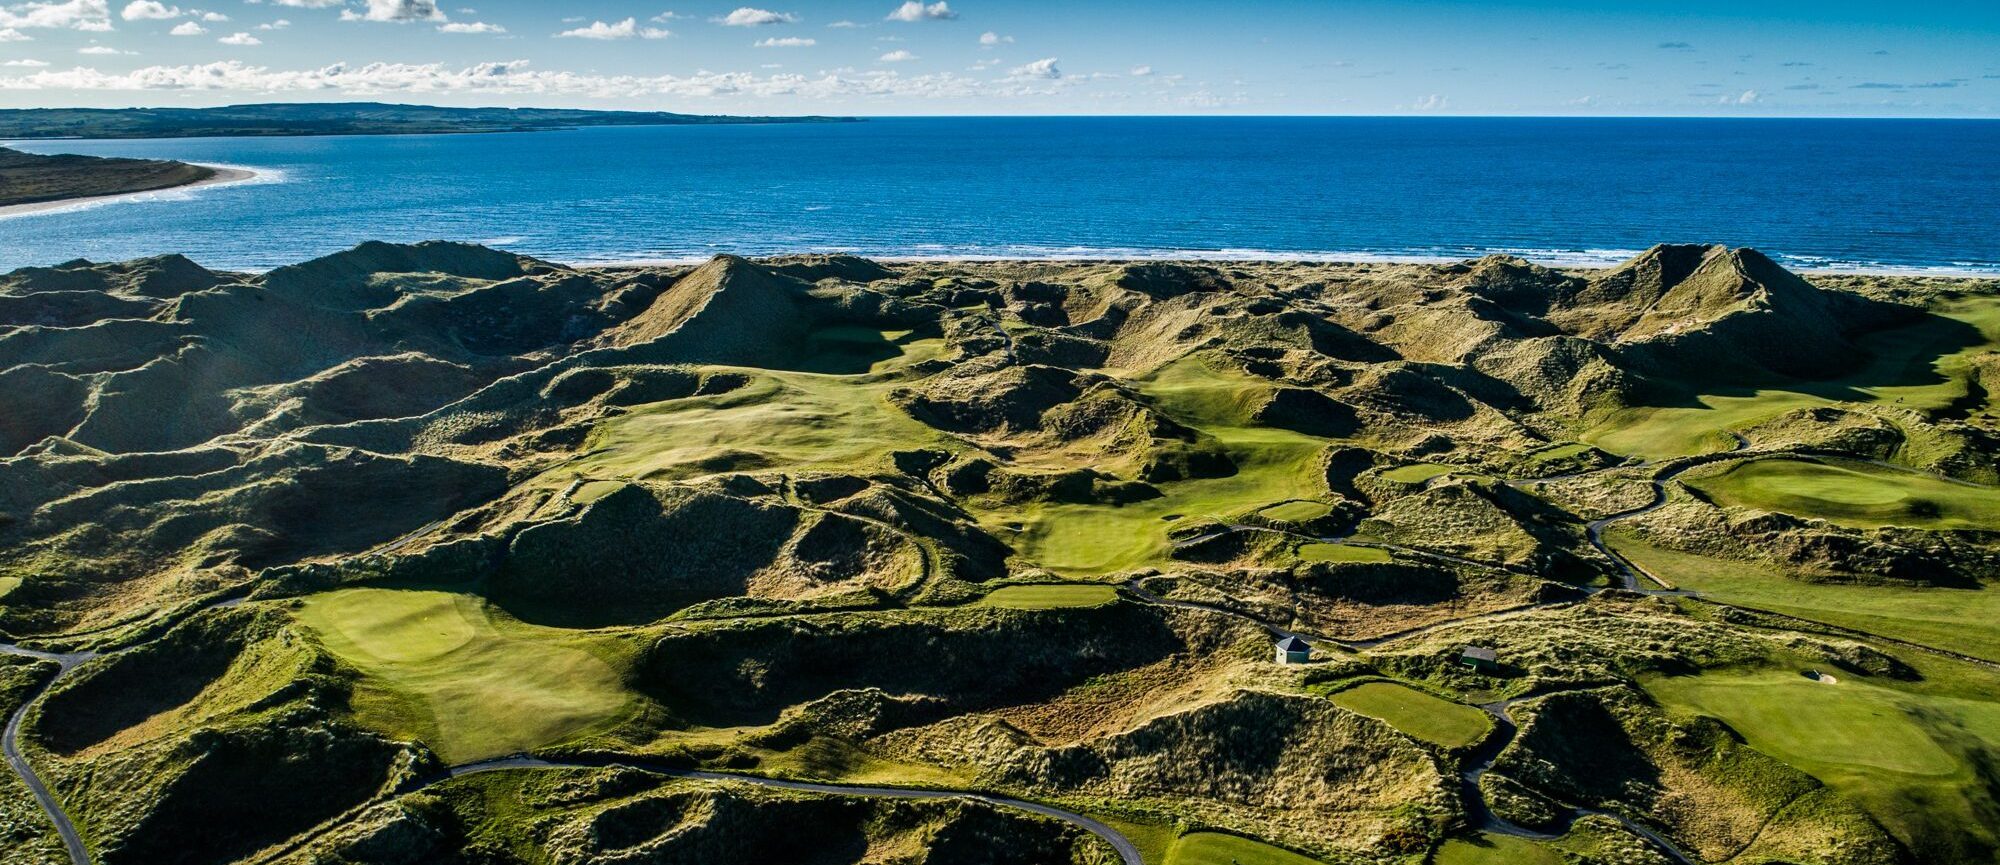 Enniscrone Golf Club on the shores of the Nothern sea